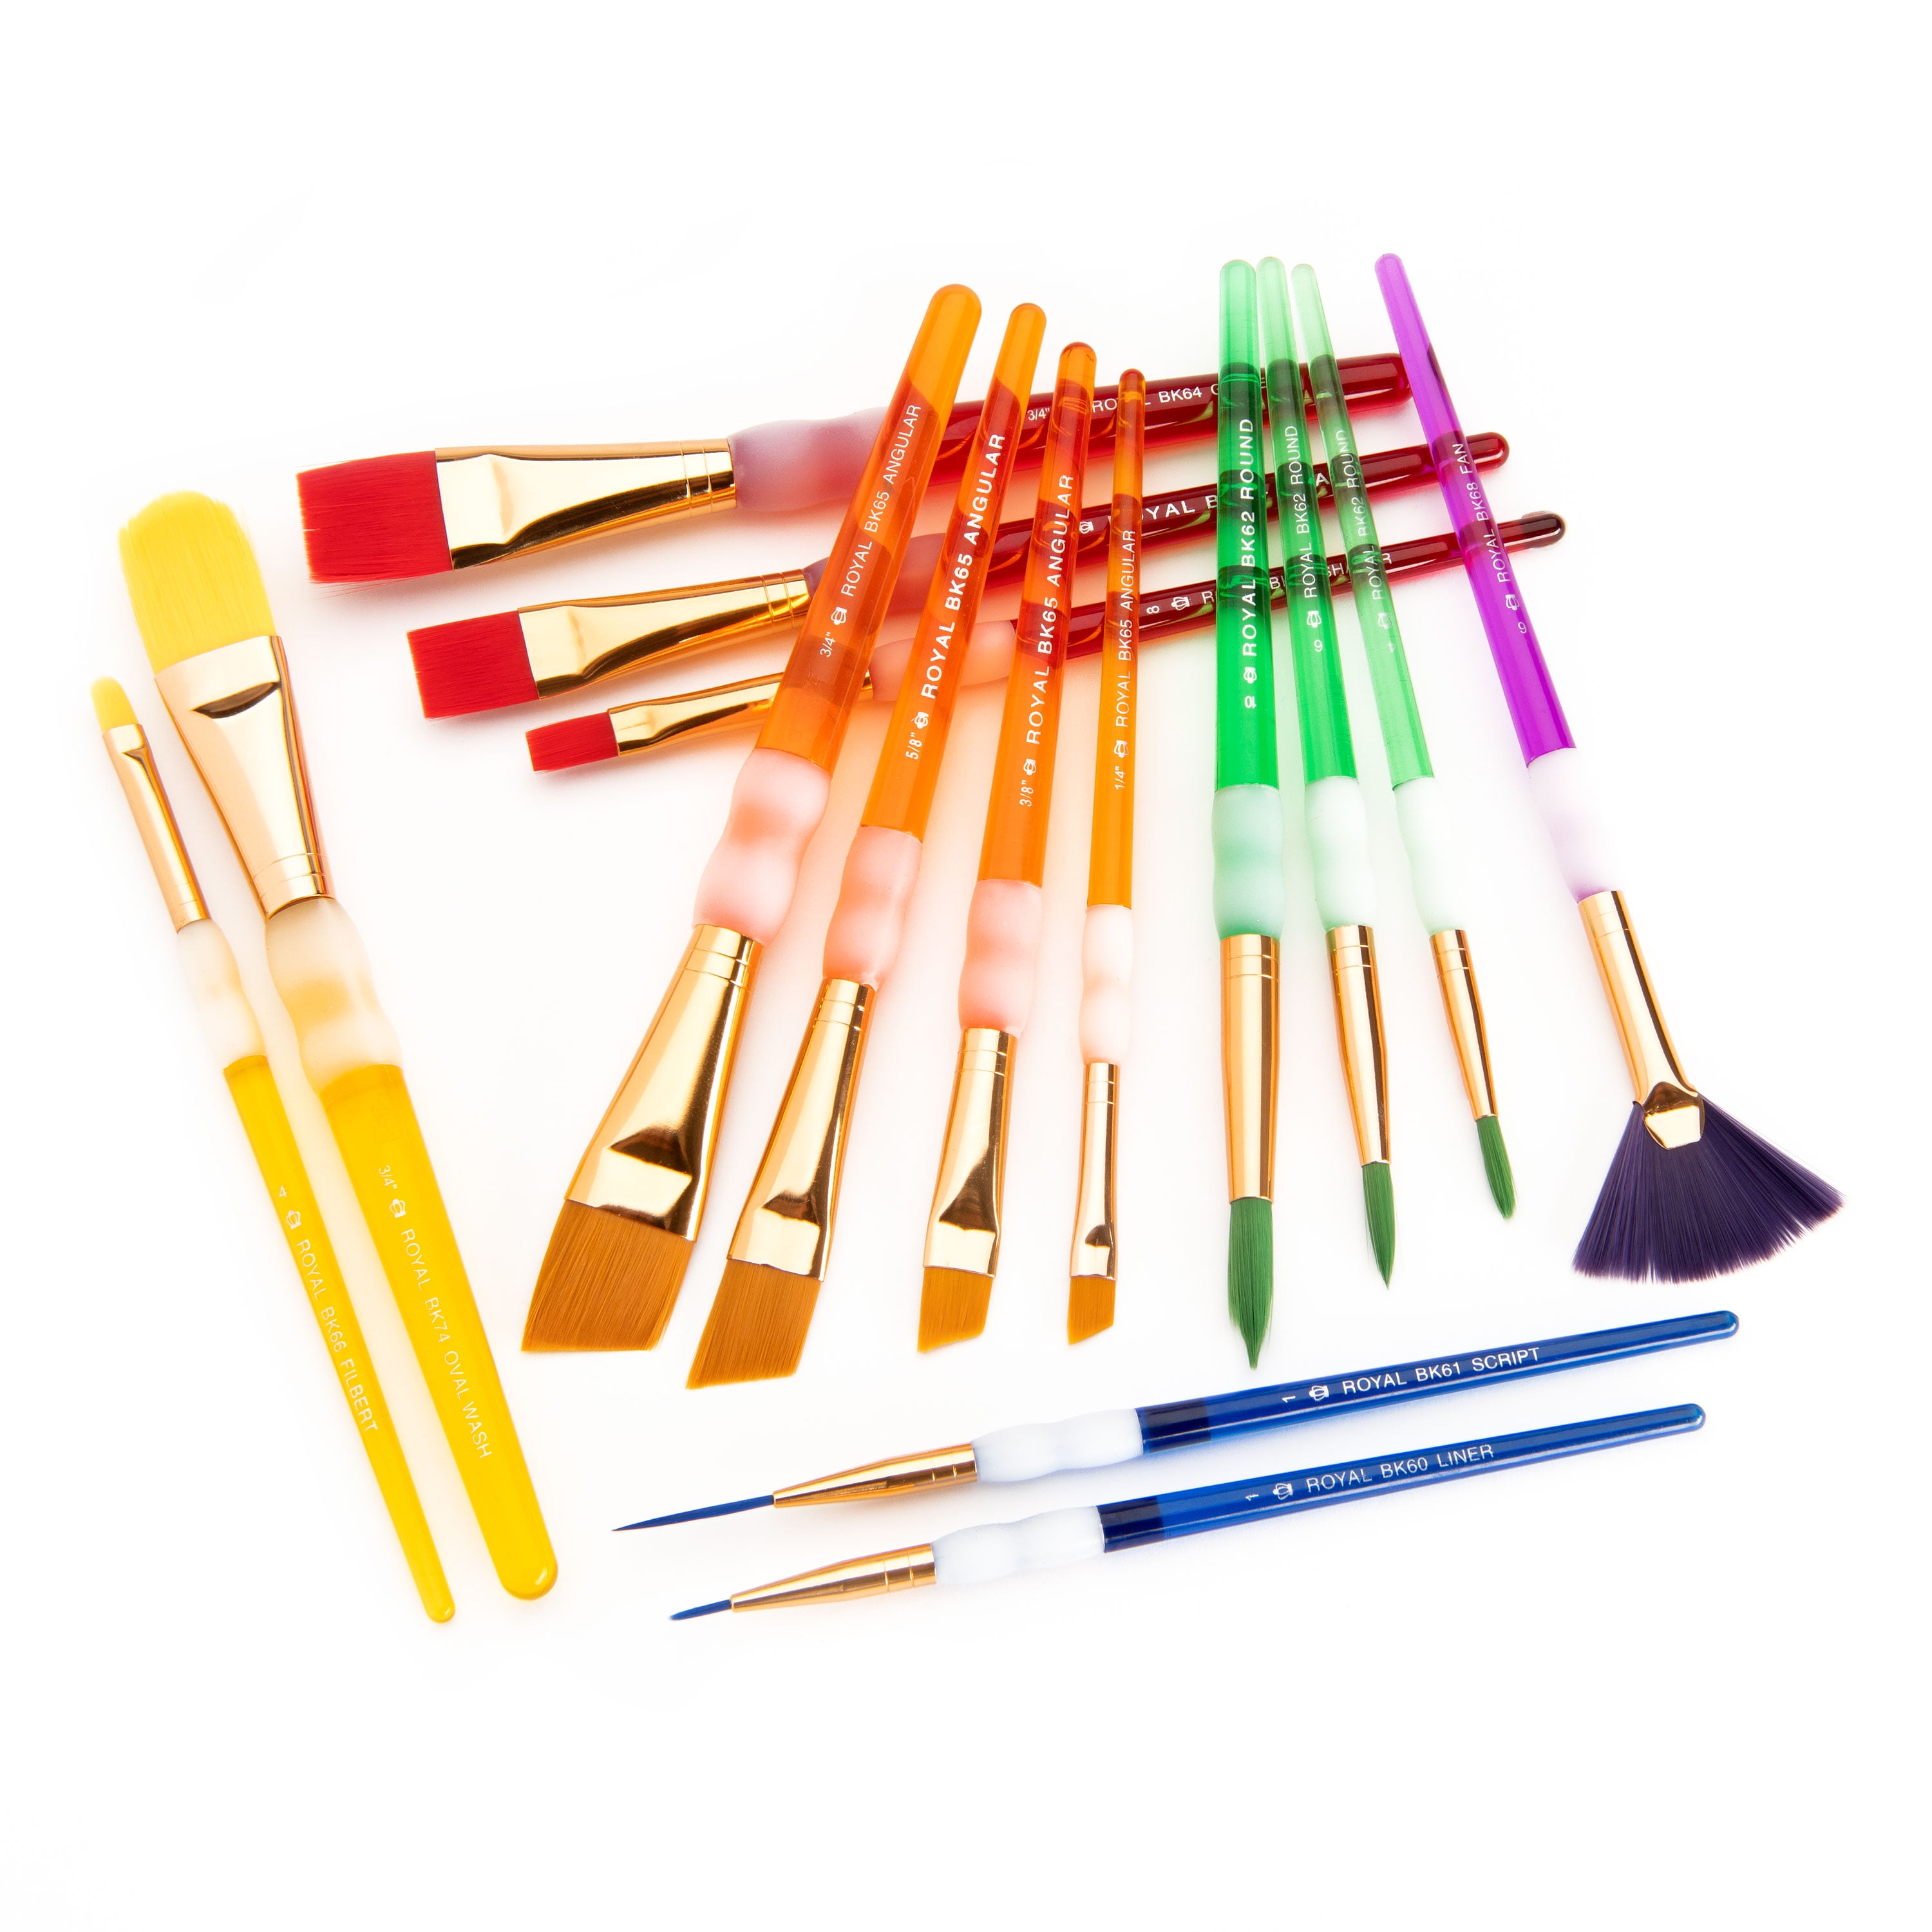 Kids Paint Brushes, W: 15 mm, 60 pc/ 1 pack [HOB-99552] - Packlinq